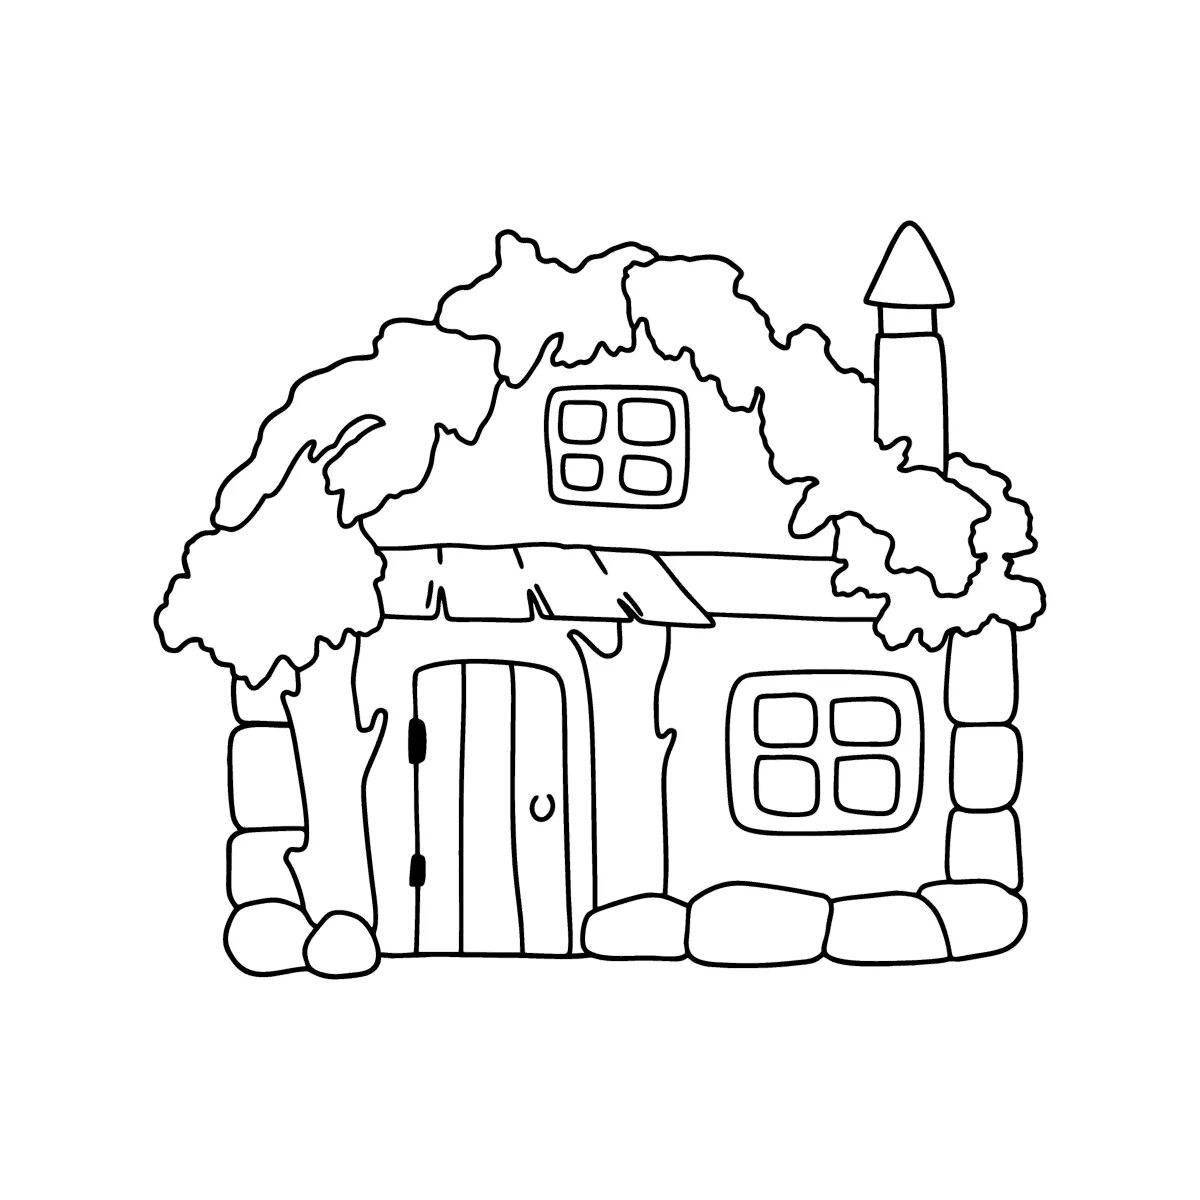 Coloring page charming hut